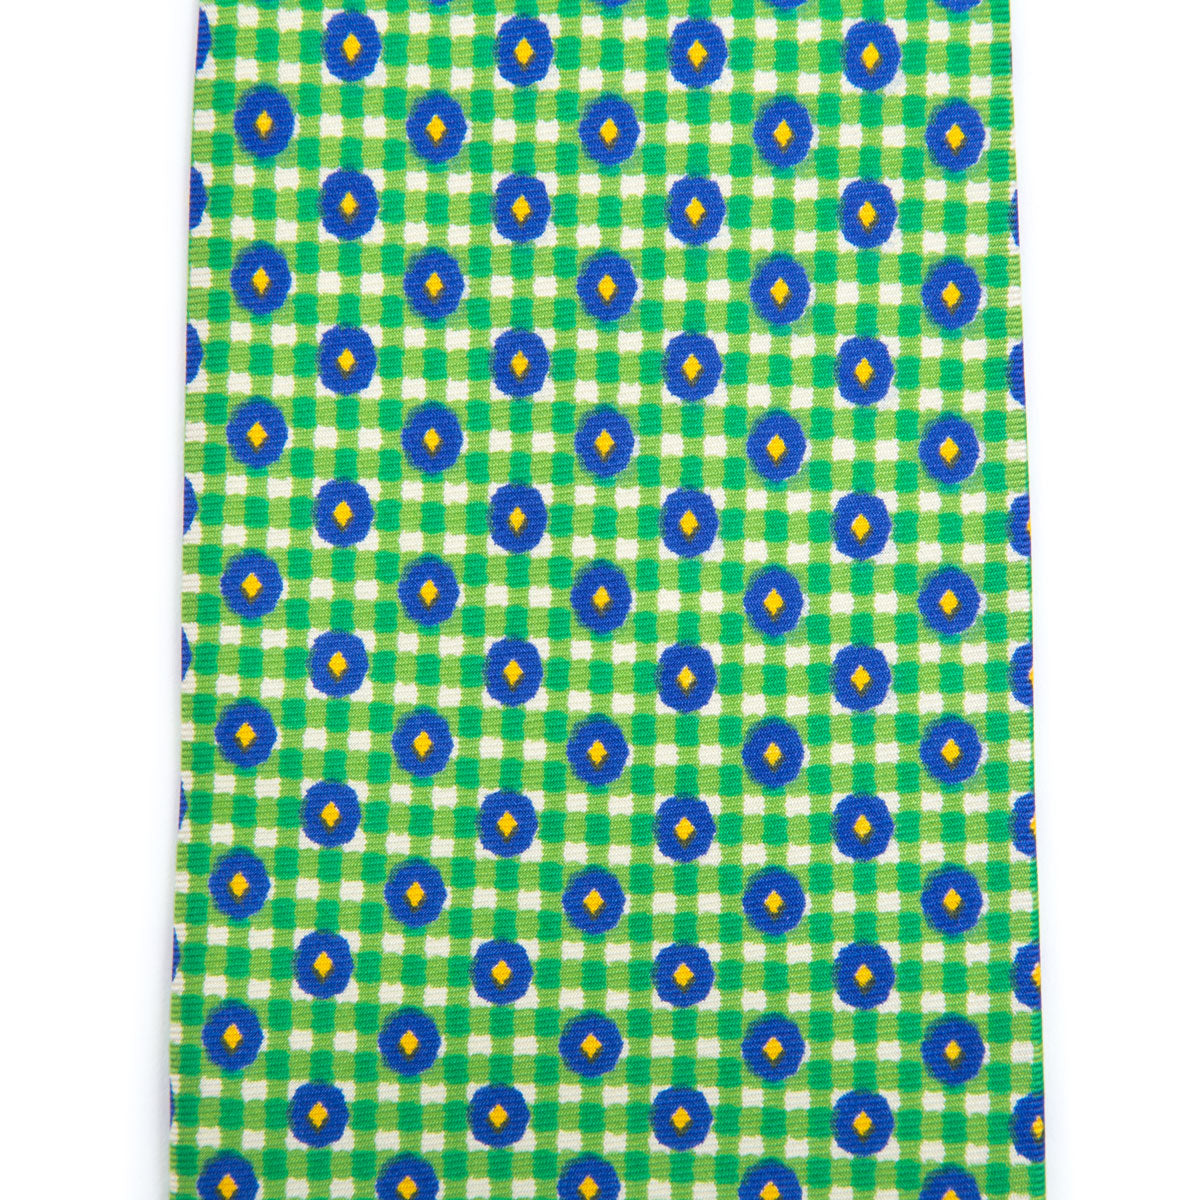 Green speckled tie